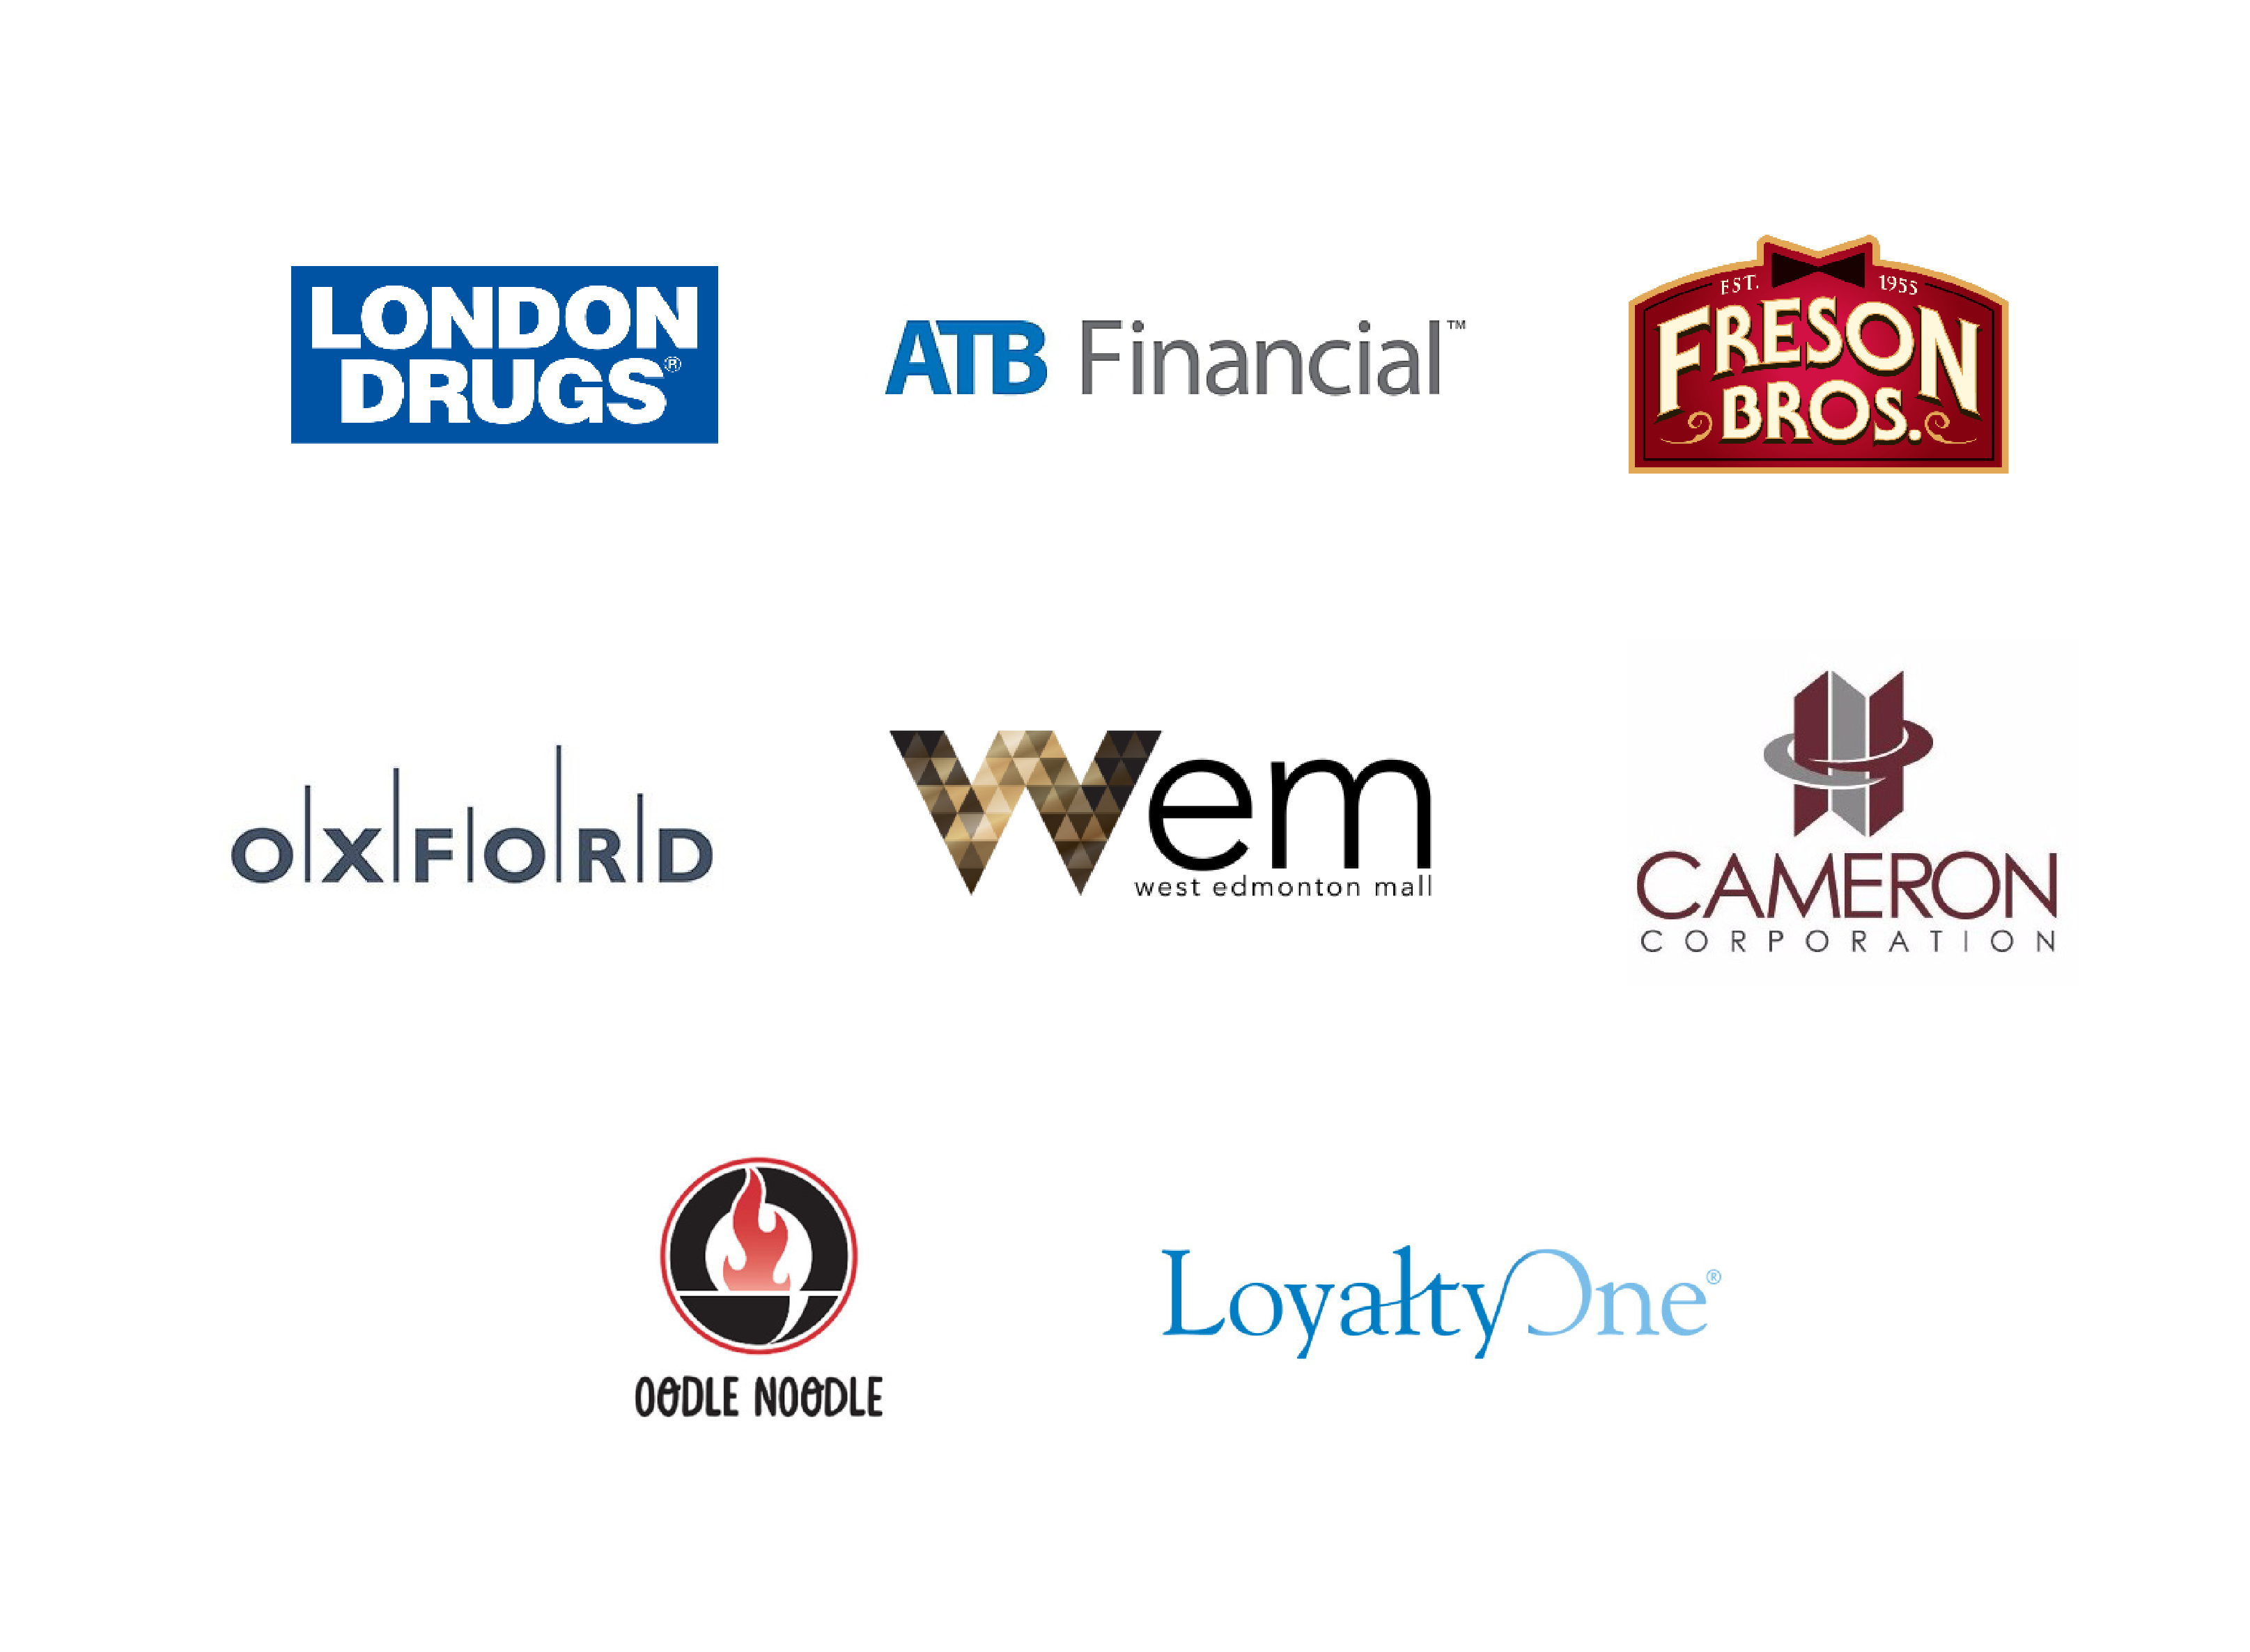 School of Retailing Partnerships including: London Drugs, ATB Financial, Freson Bros, Oxford, West Edmonton Mall, Cameron Corporation, Oodle Noodle, and Loyalty One